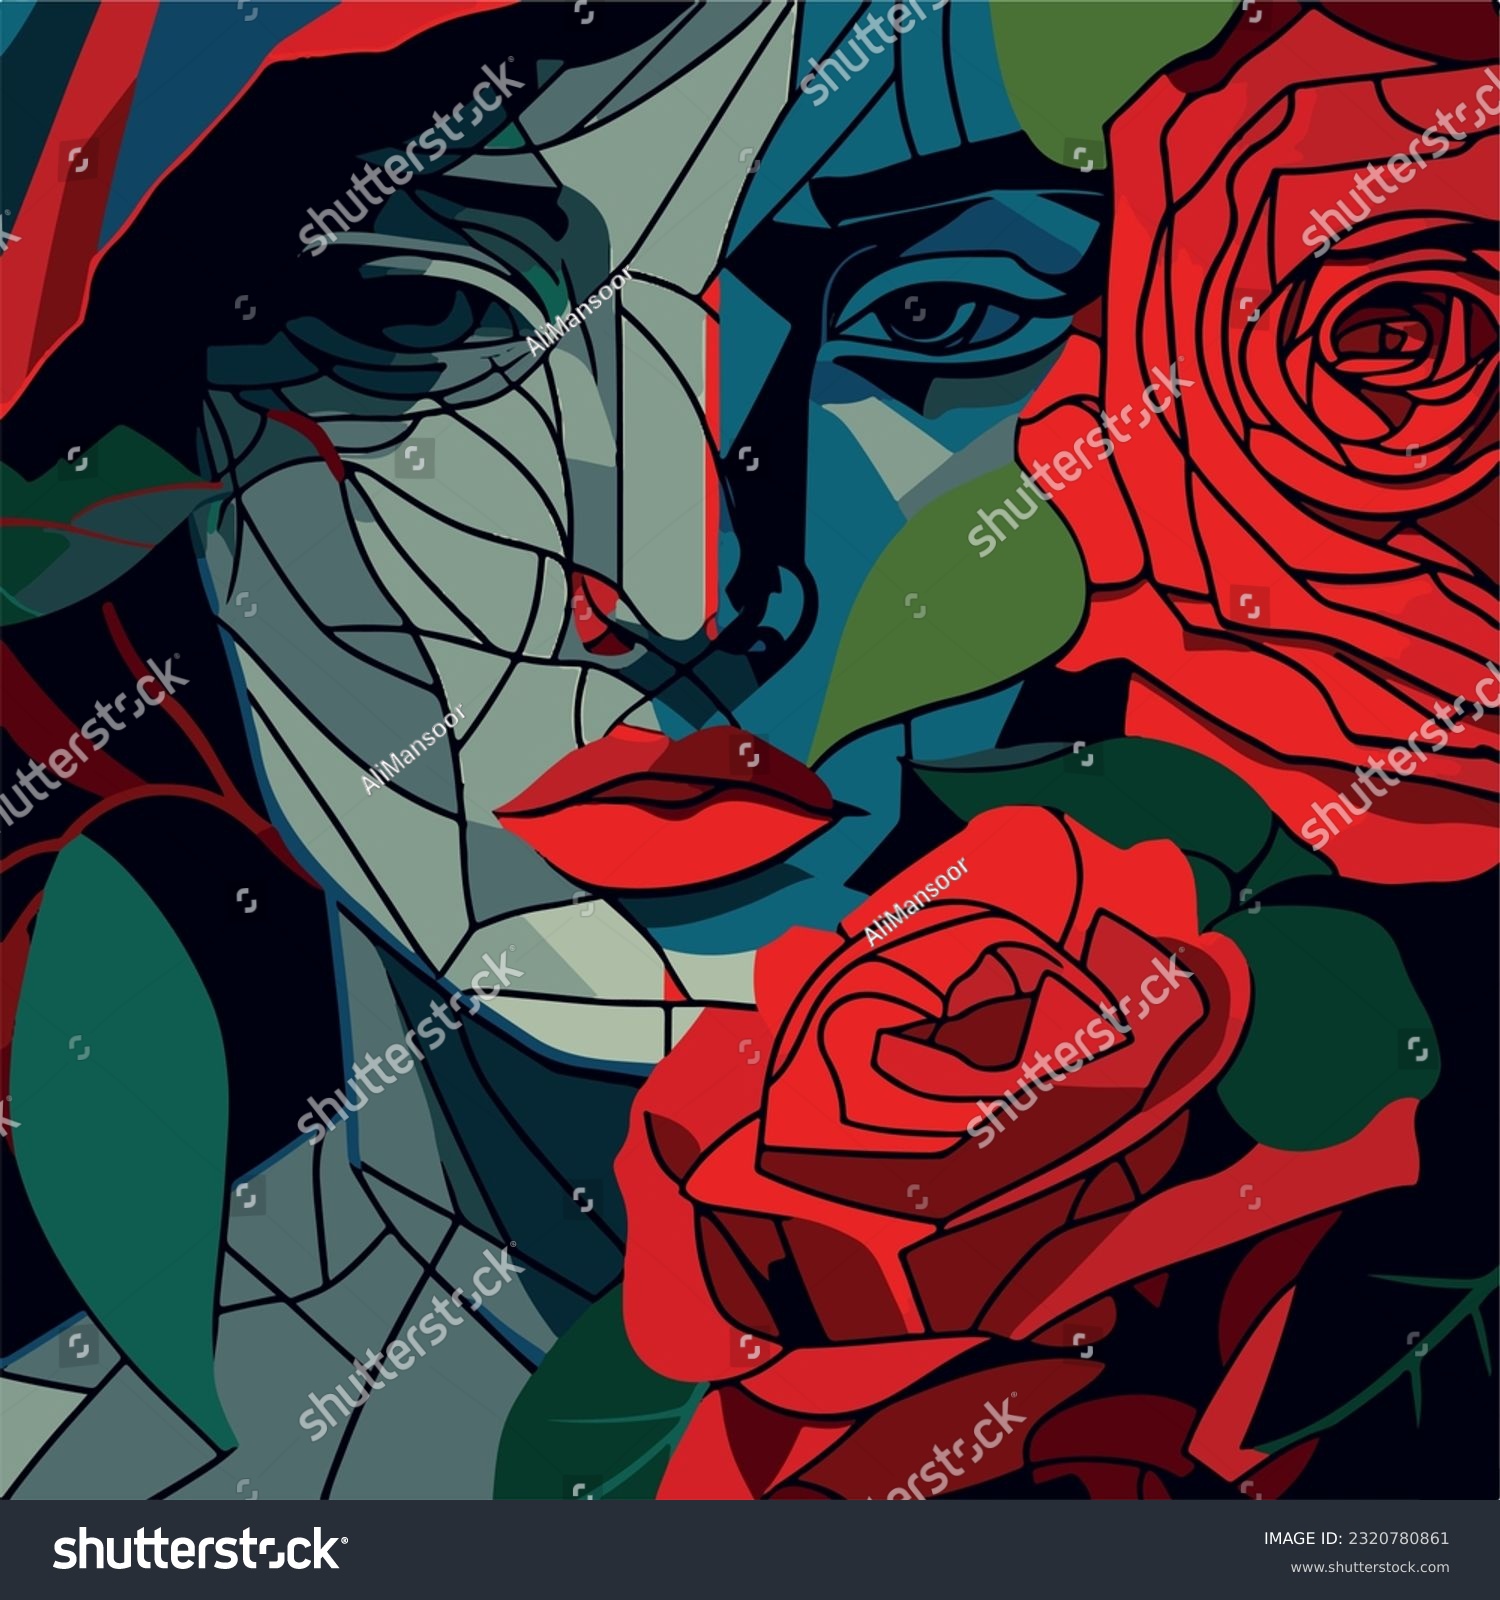 SVG of abstract face of a beautiful woman fused with a rose in the style of picasso svg